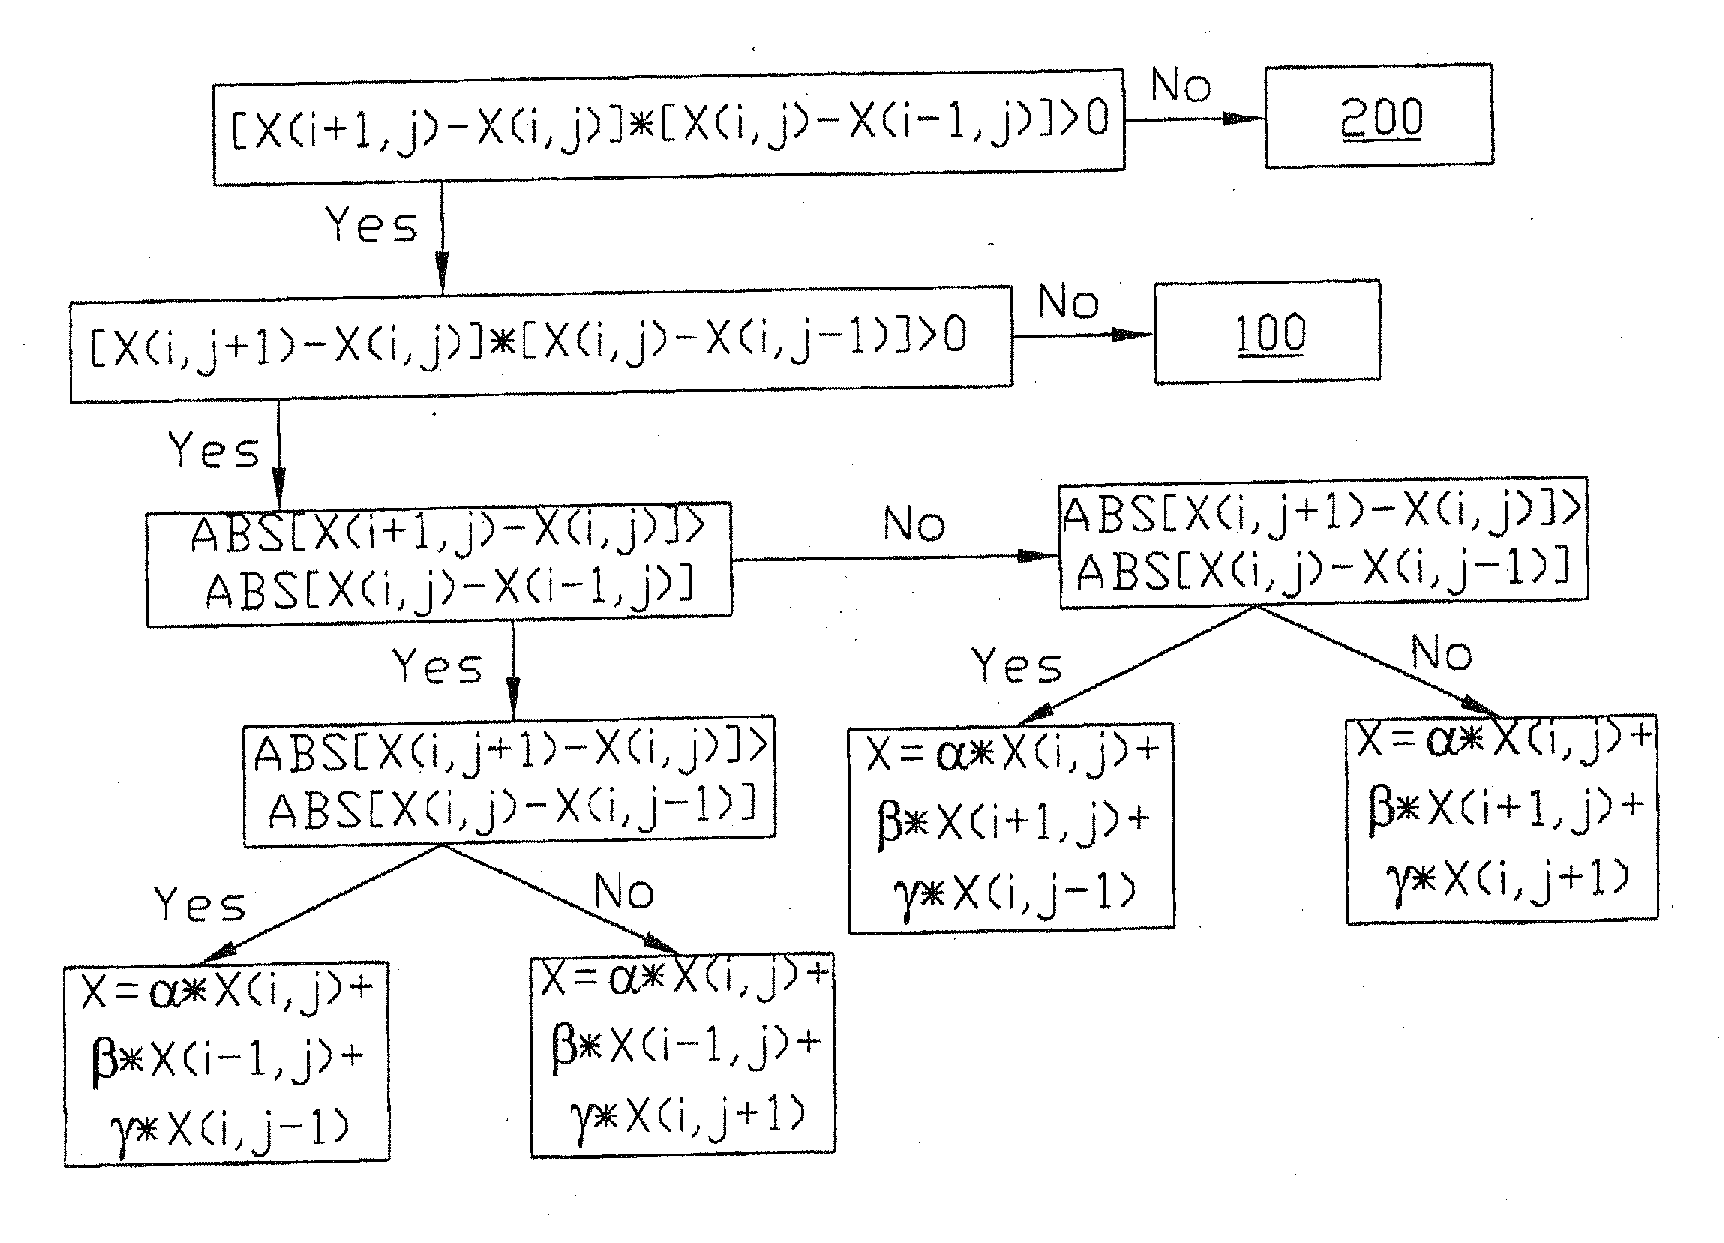 Modulation transfer function of an image